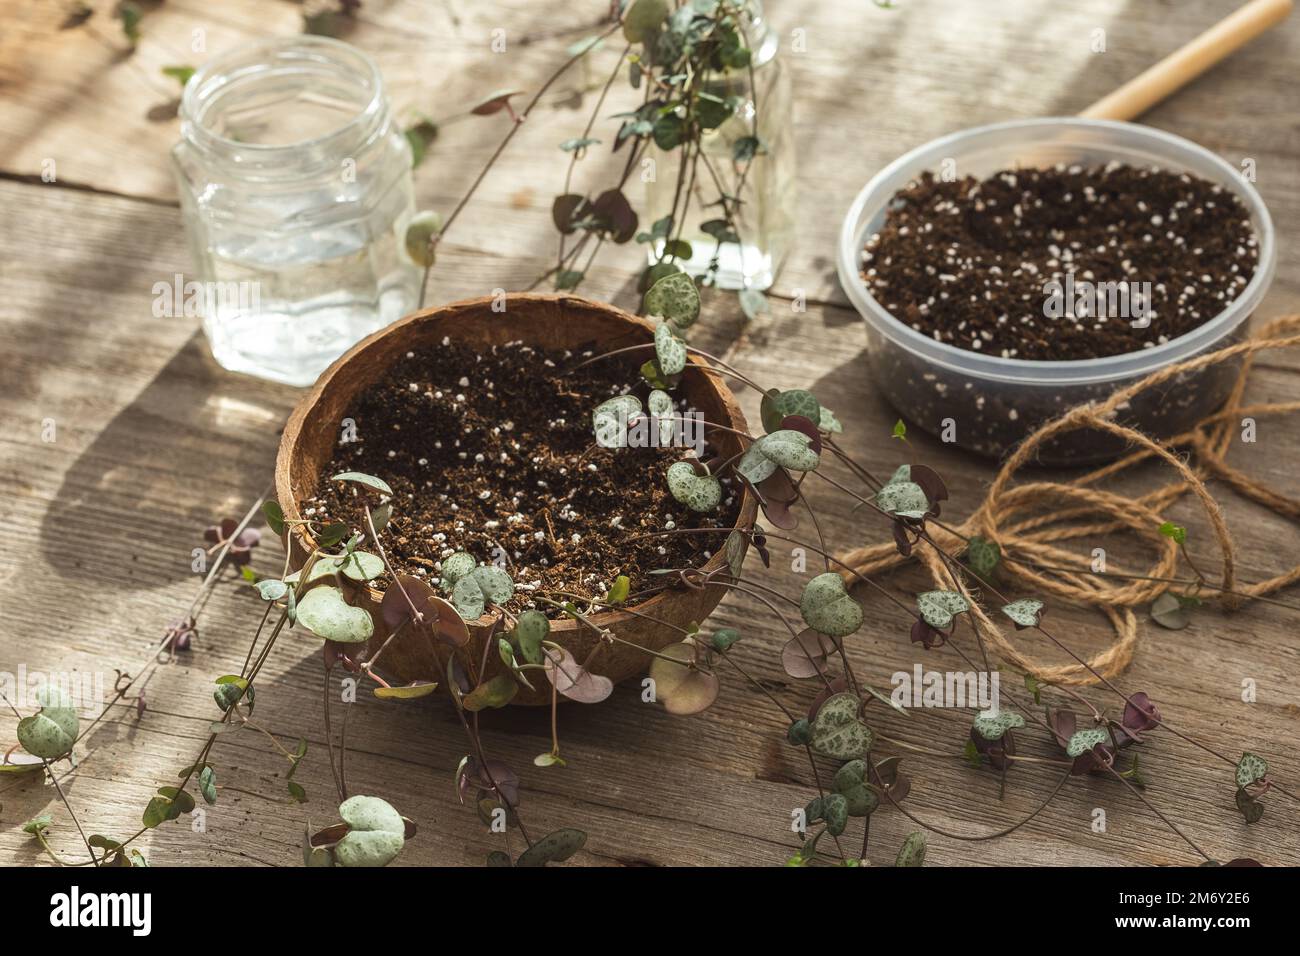 Ceropegia Woodii houseplant Propagation and Planting Process. String of Hearts plant stem cuttings rooted in water and transplanted in soil. Handmade Stock Photo